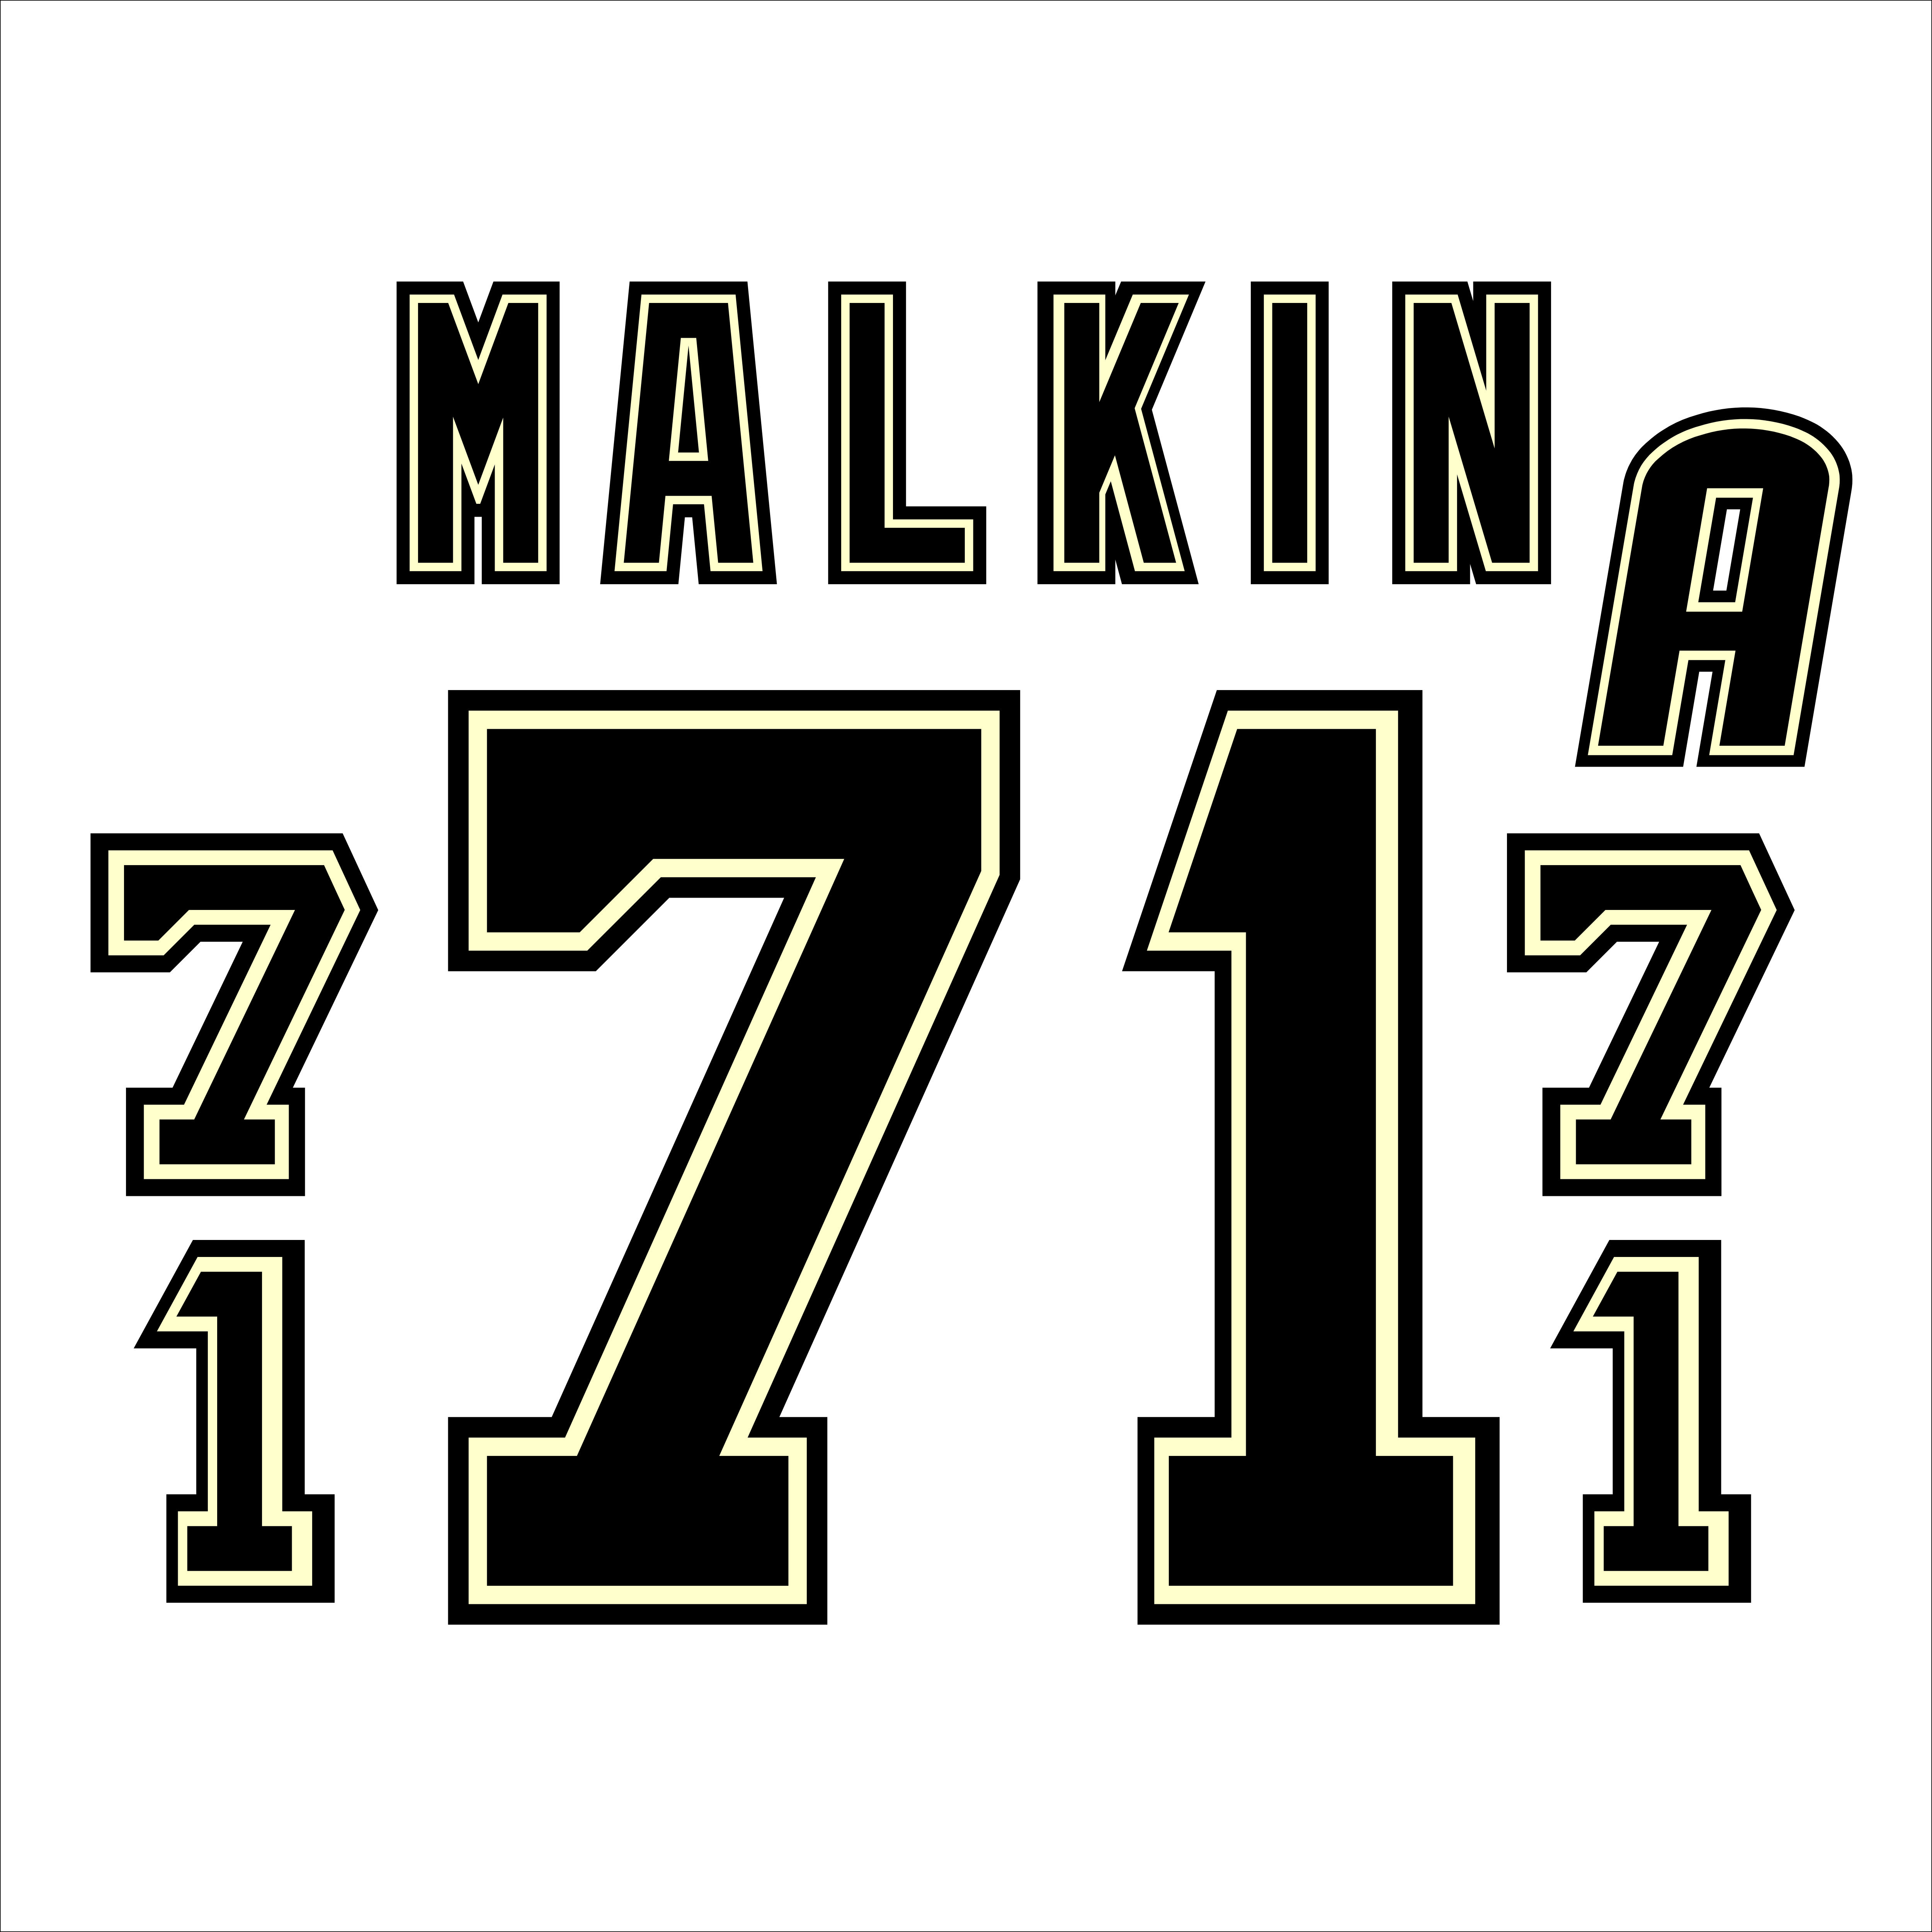 Pittsburgh Penguins Lettering Kit for an Authentic White 